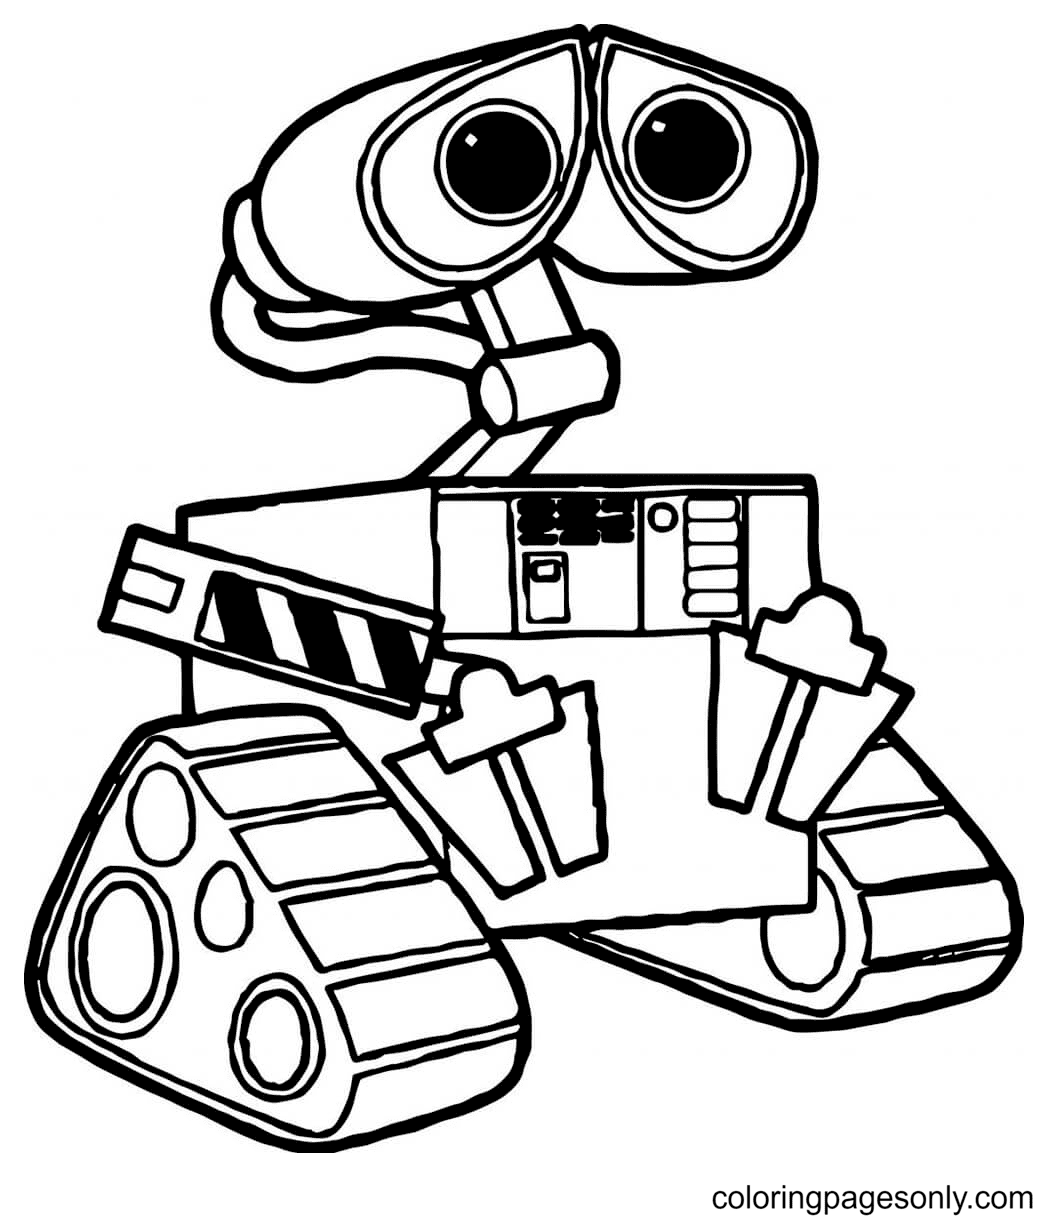 Robot coloring pages printable for free download